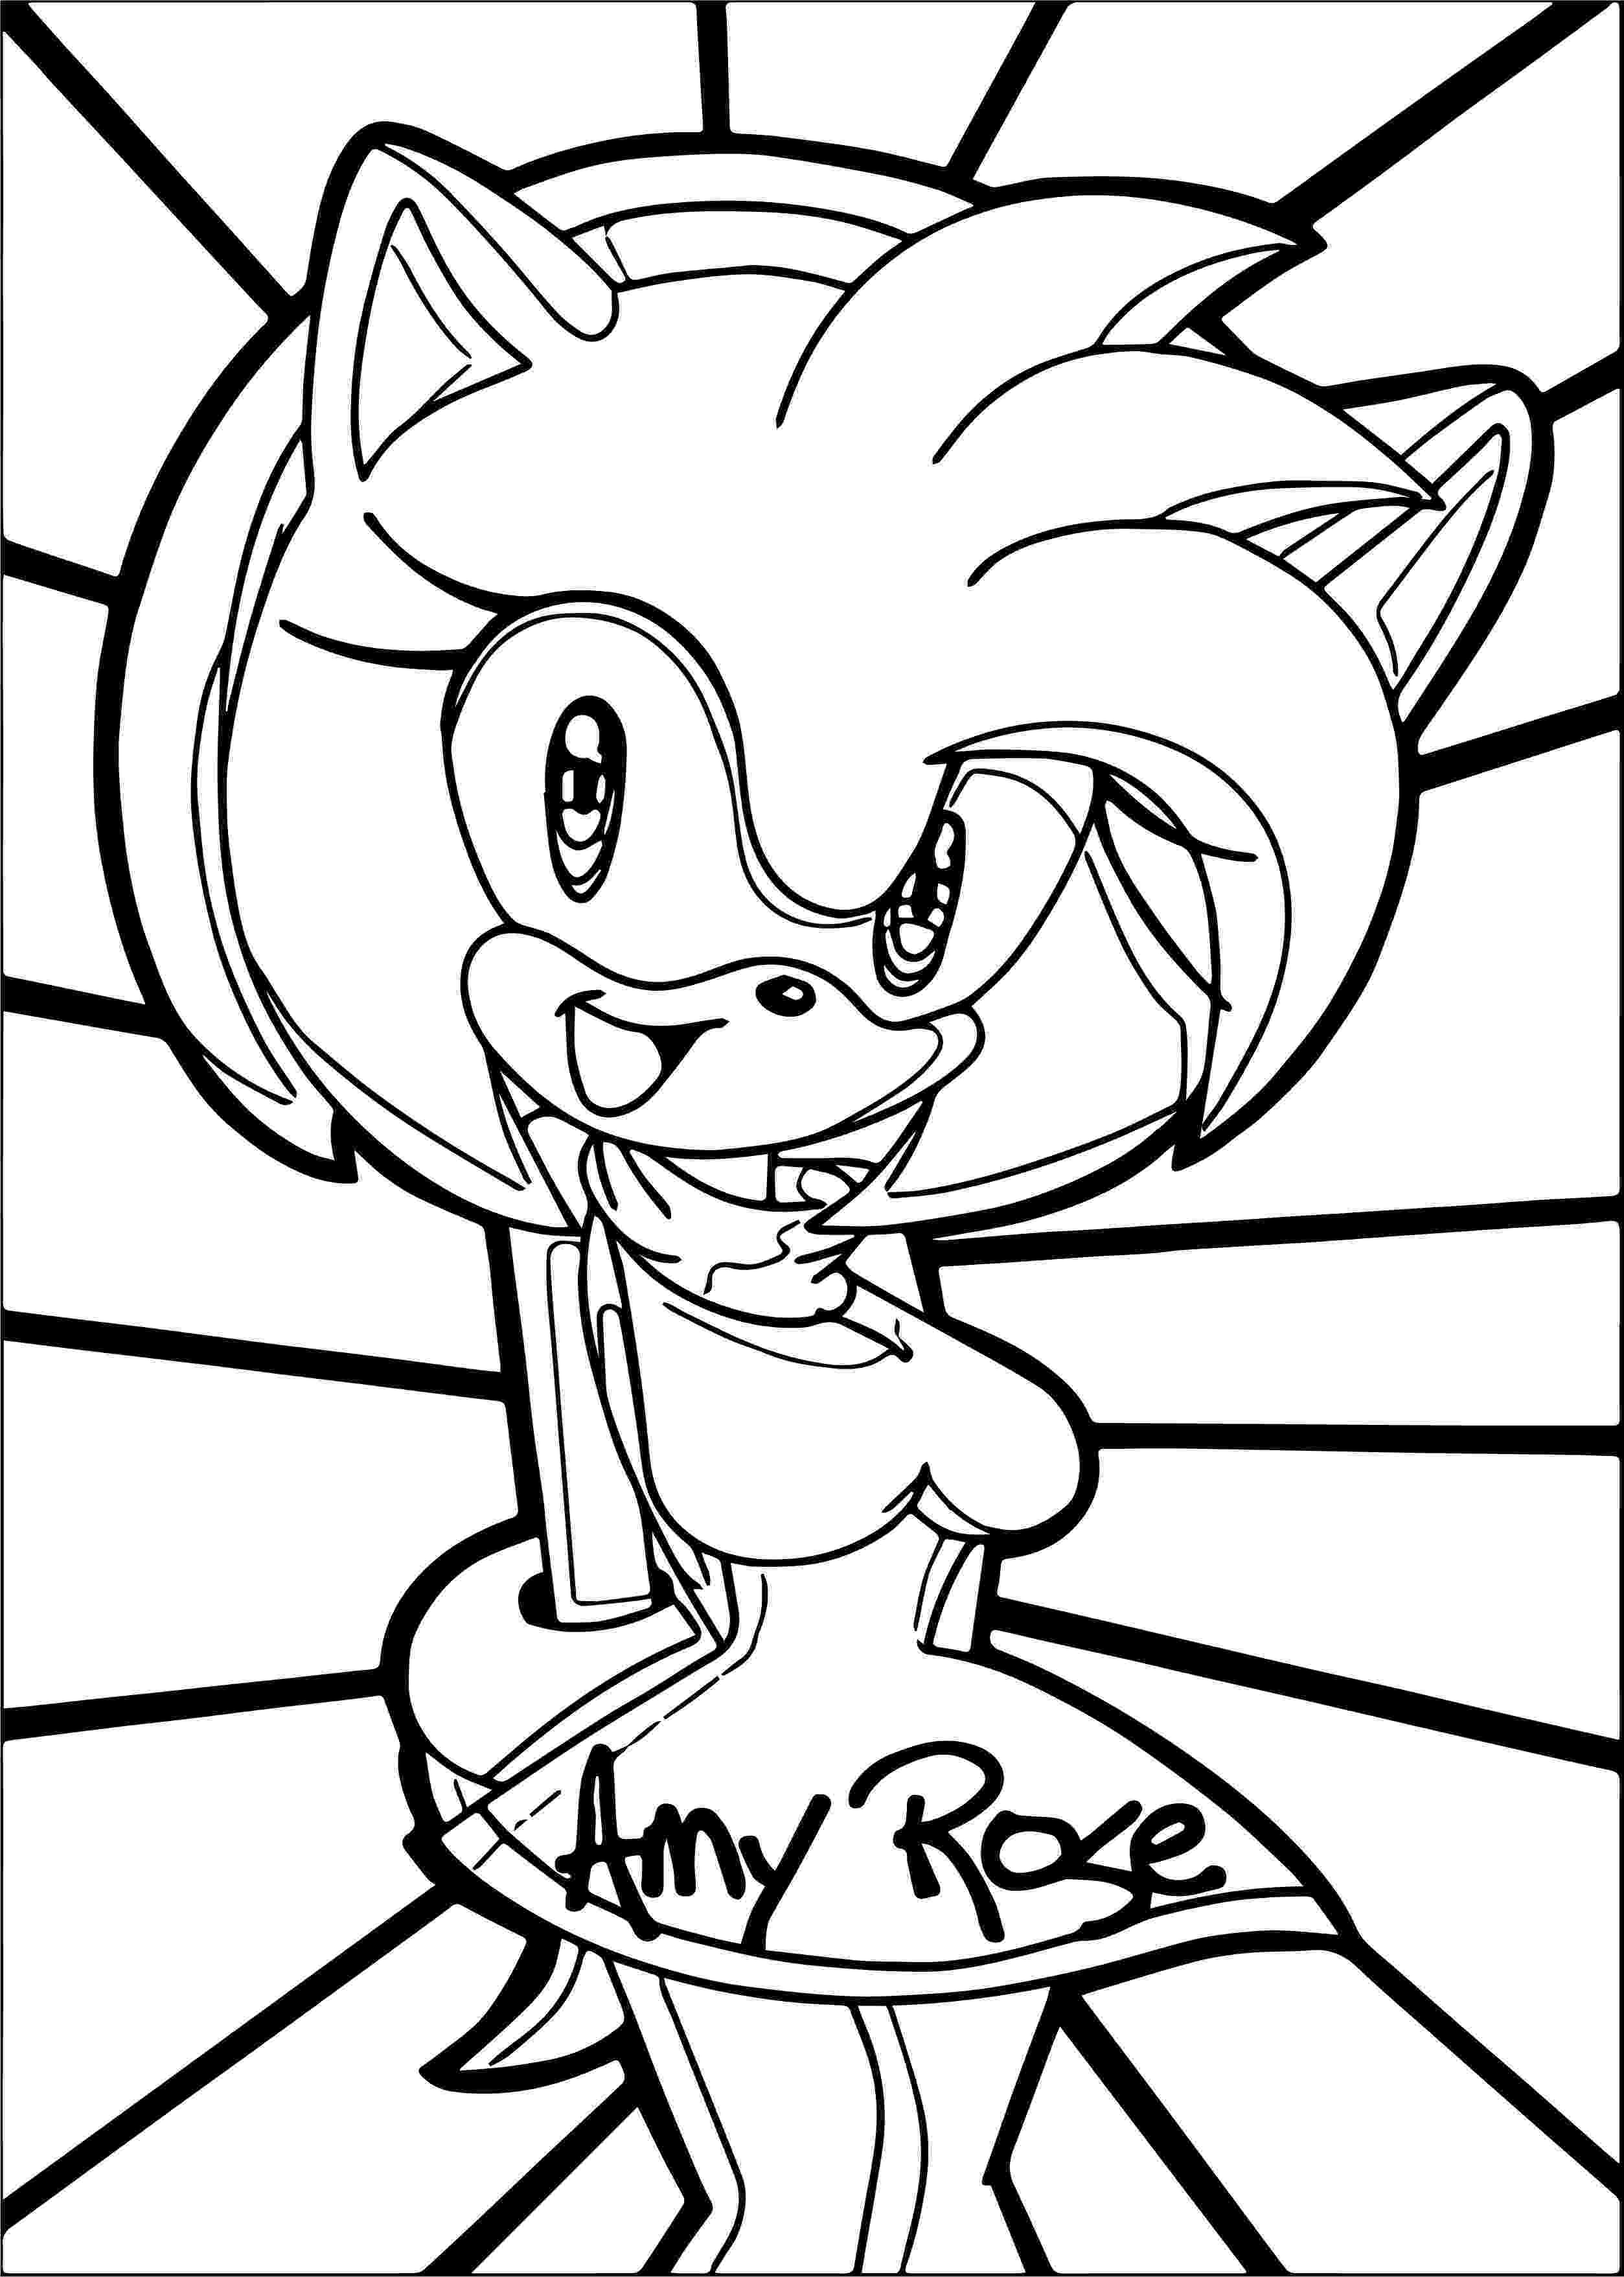 amy rose coloring pages colour me amy rose 2 by un genesis on deviantart pages rose coloring amy 